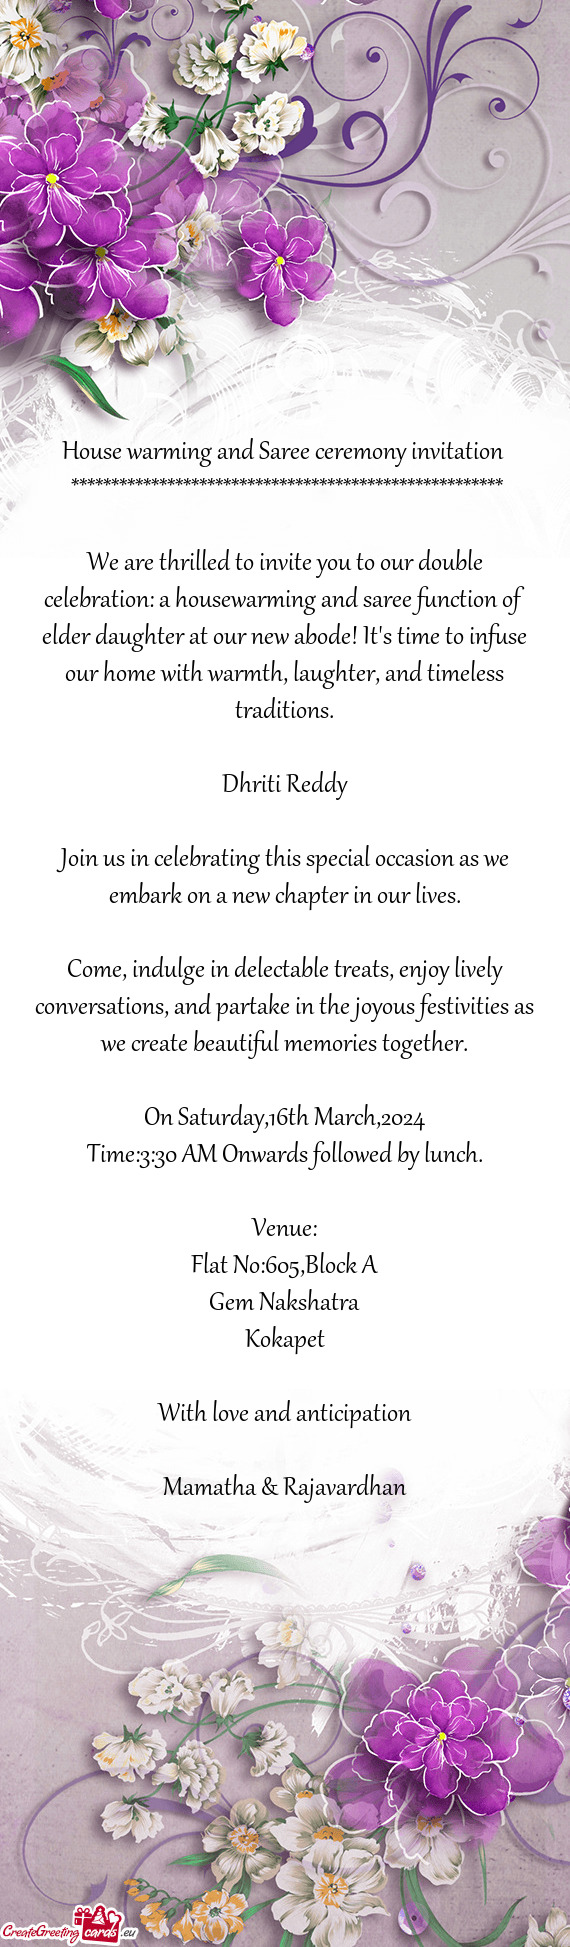 We are thrilled to invite you to our double celebration: a housewarming and saree function of elder